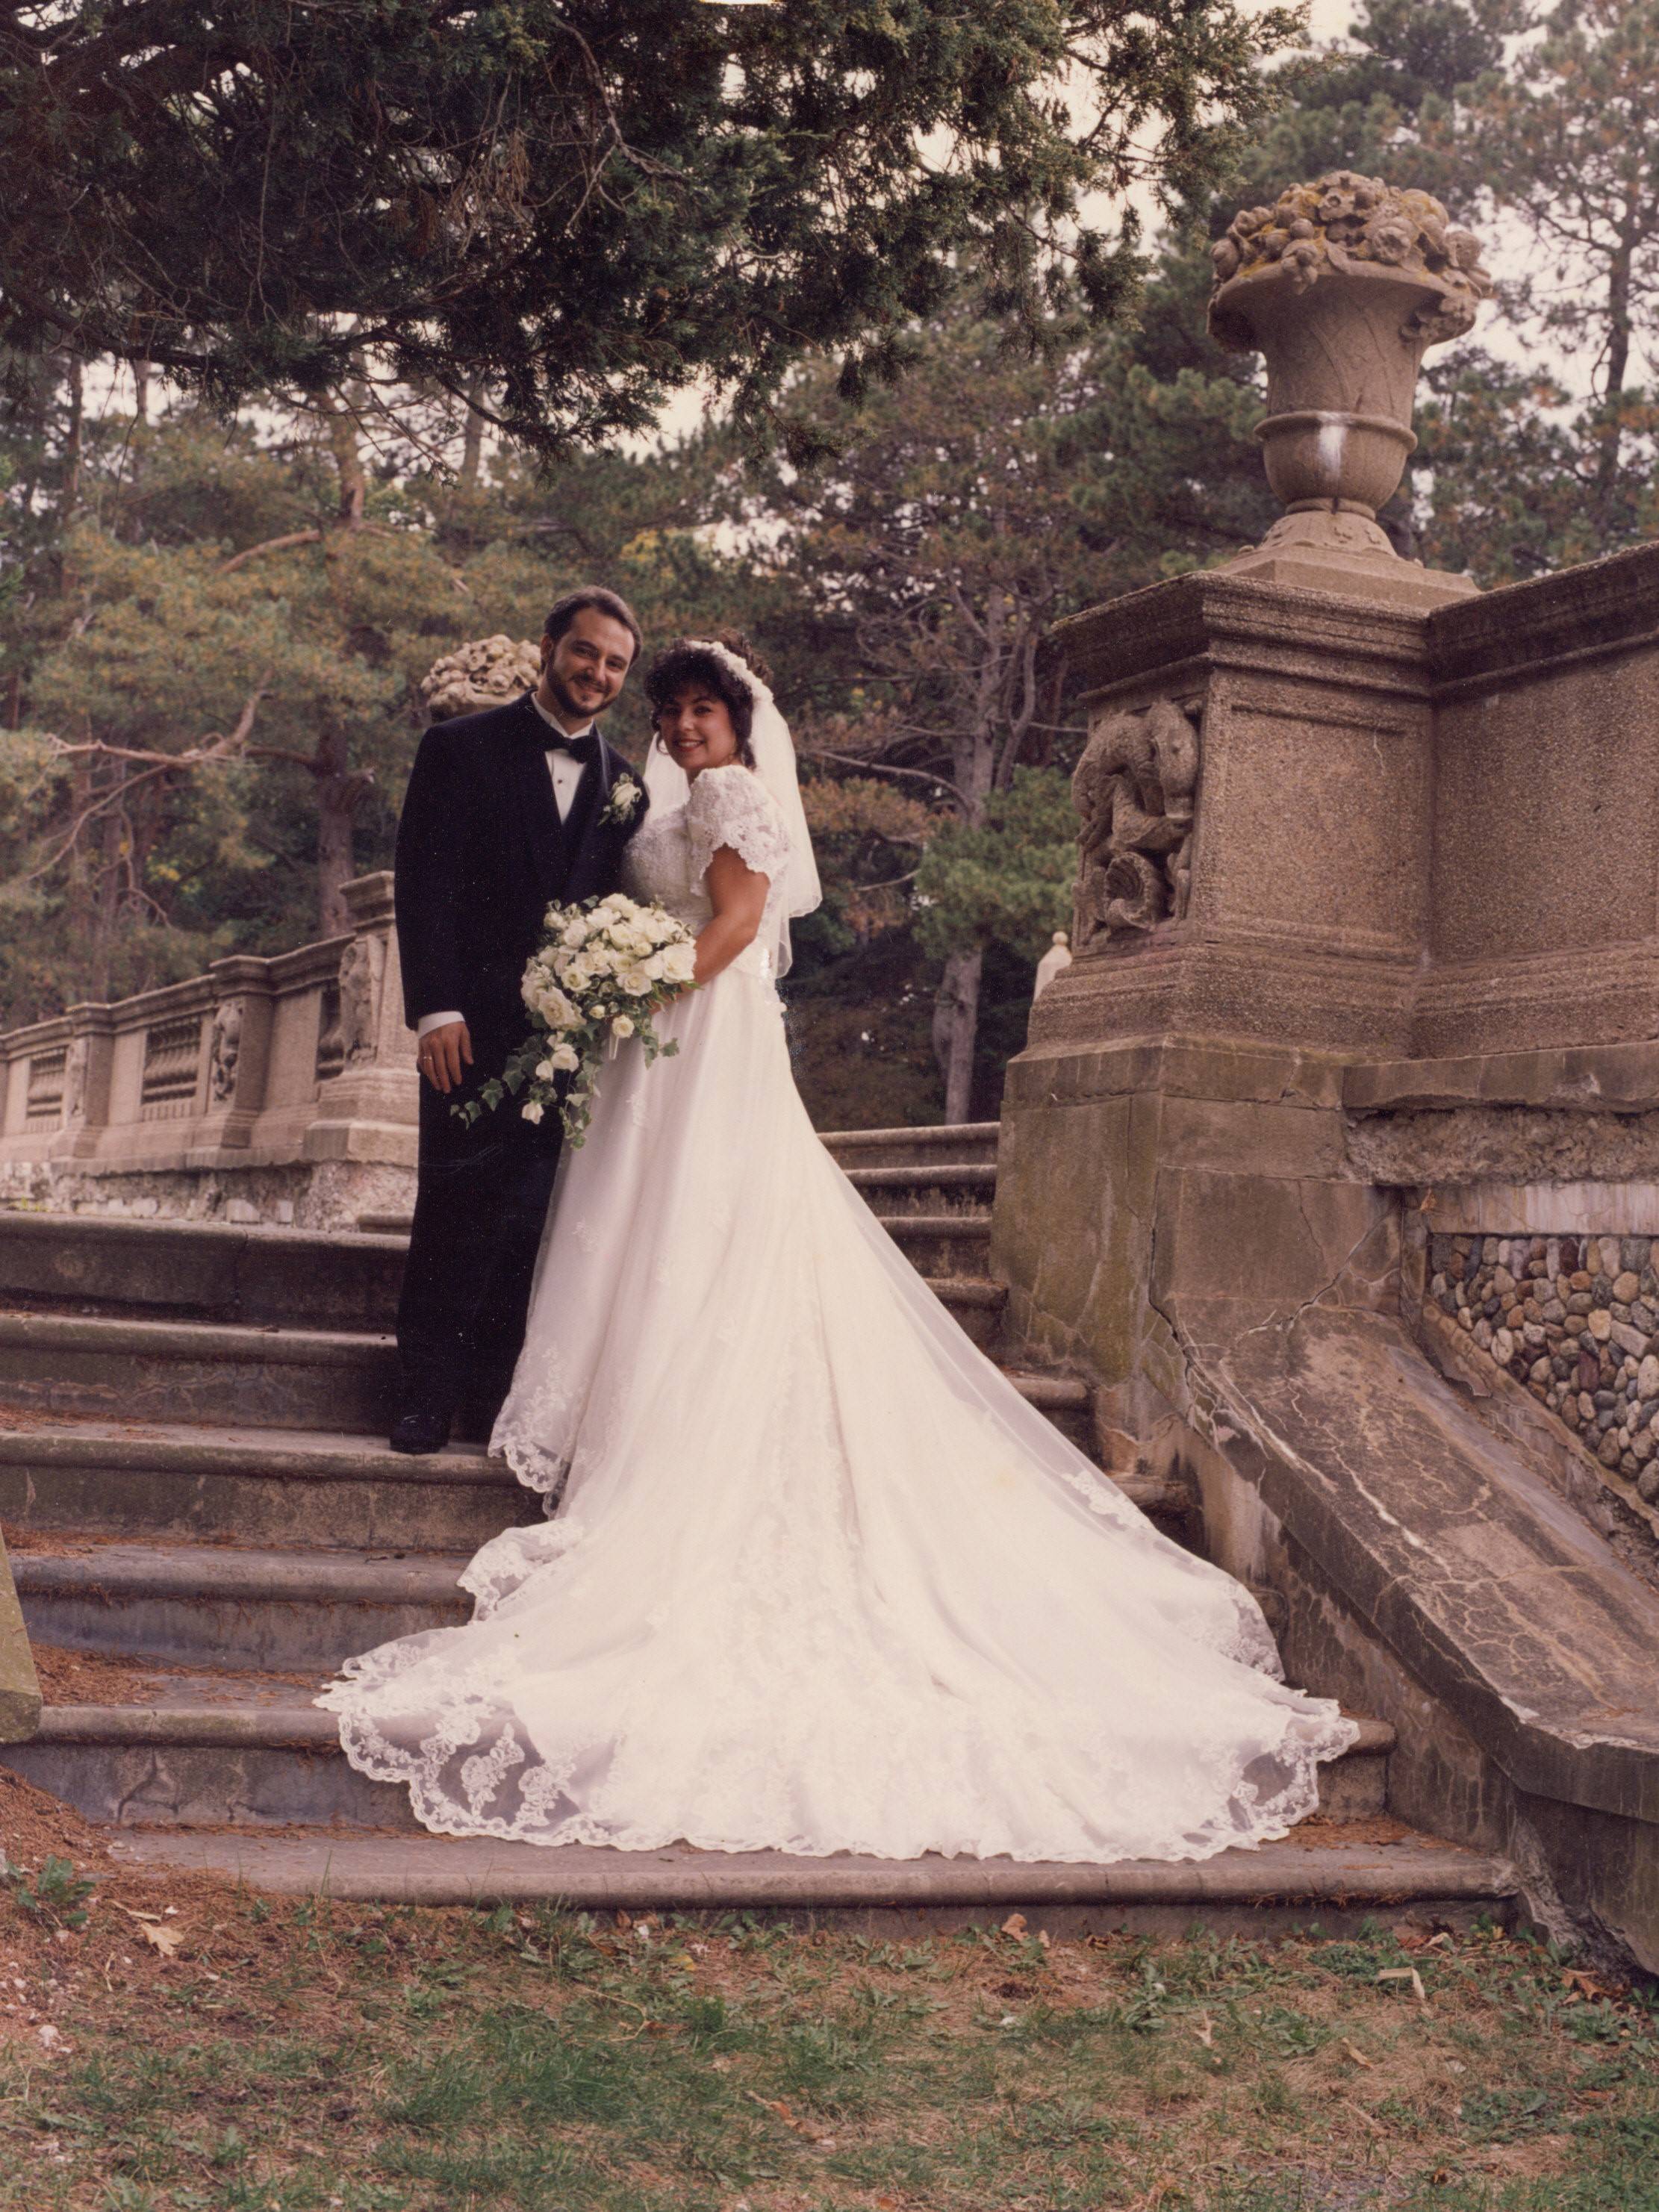 Lisa and Jeff Hainline had their "princess wedding" at The Crane Estate at Castle Hill in Ipswich, Massachusetts, on Oct. 14, 1995.